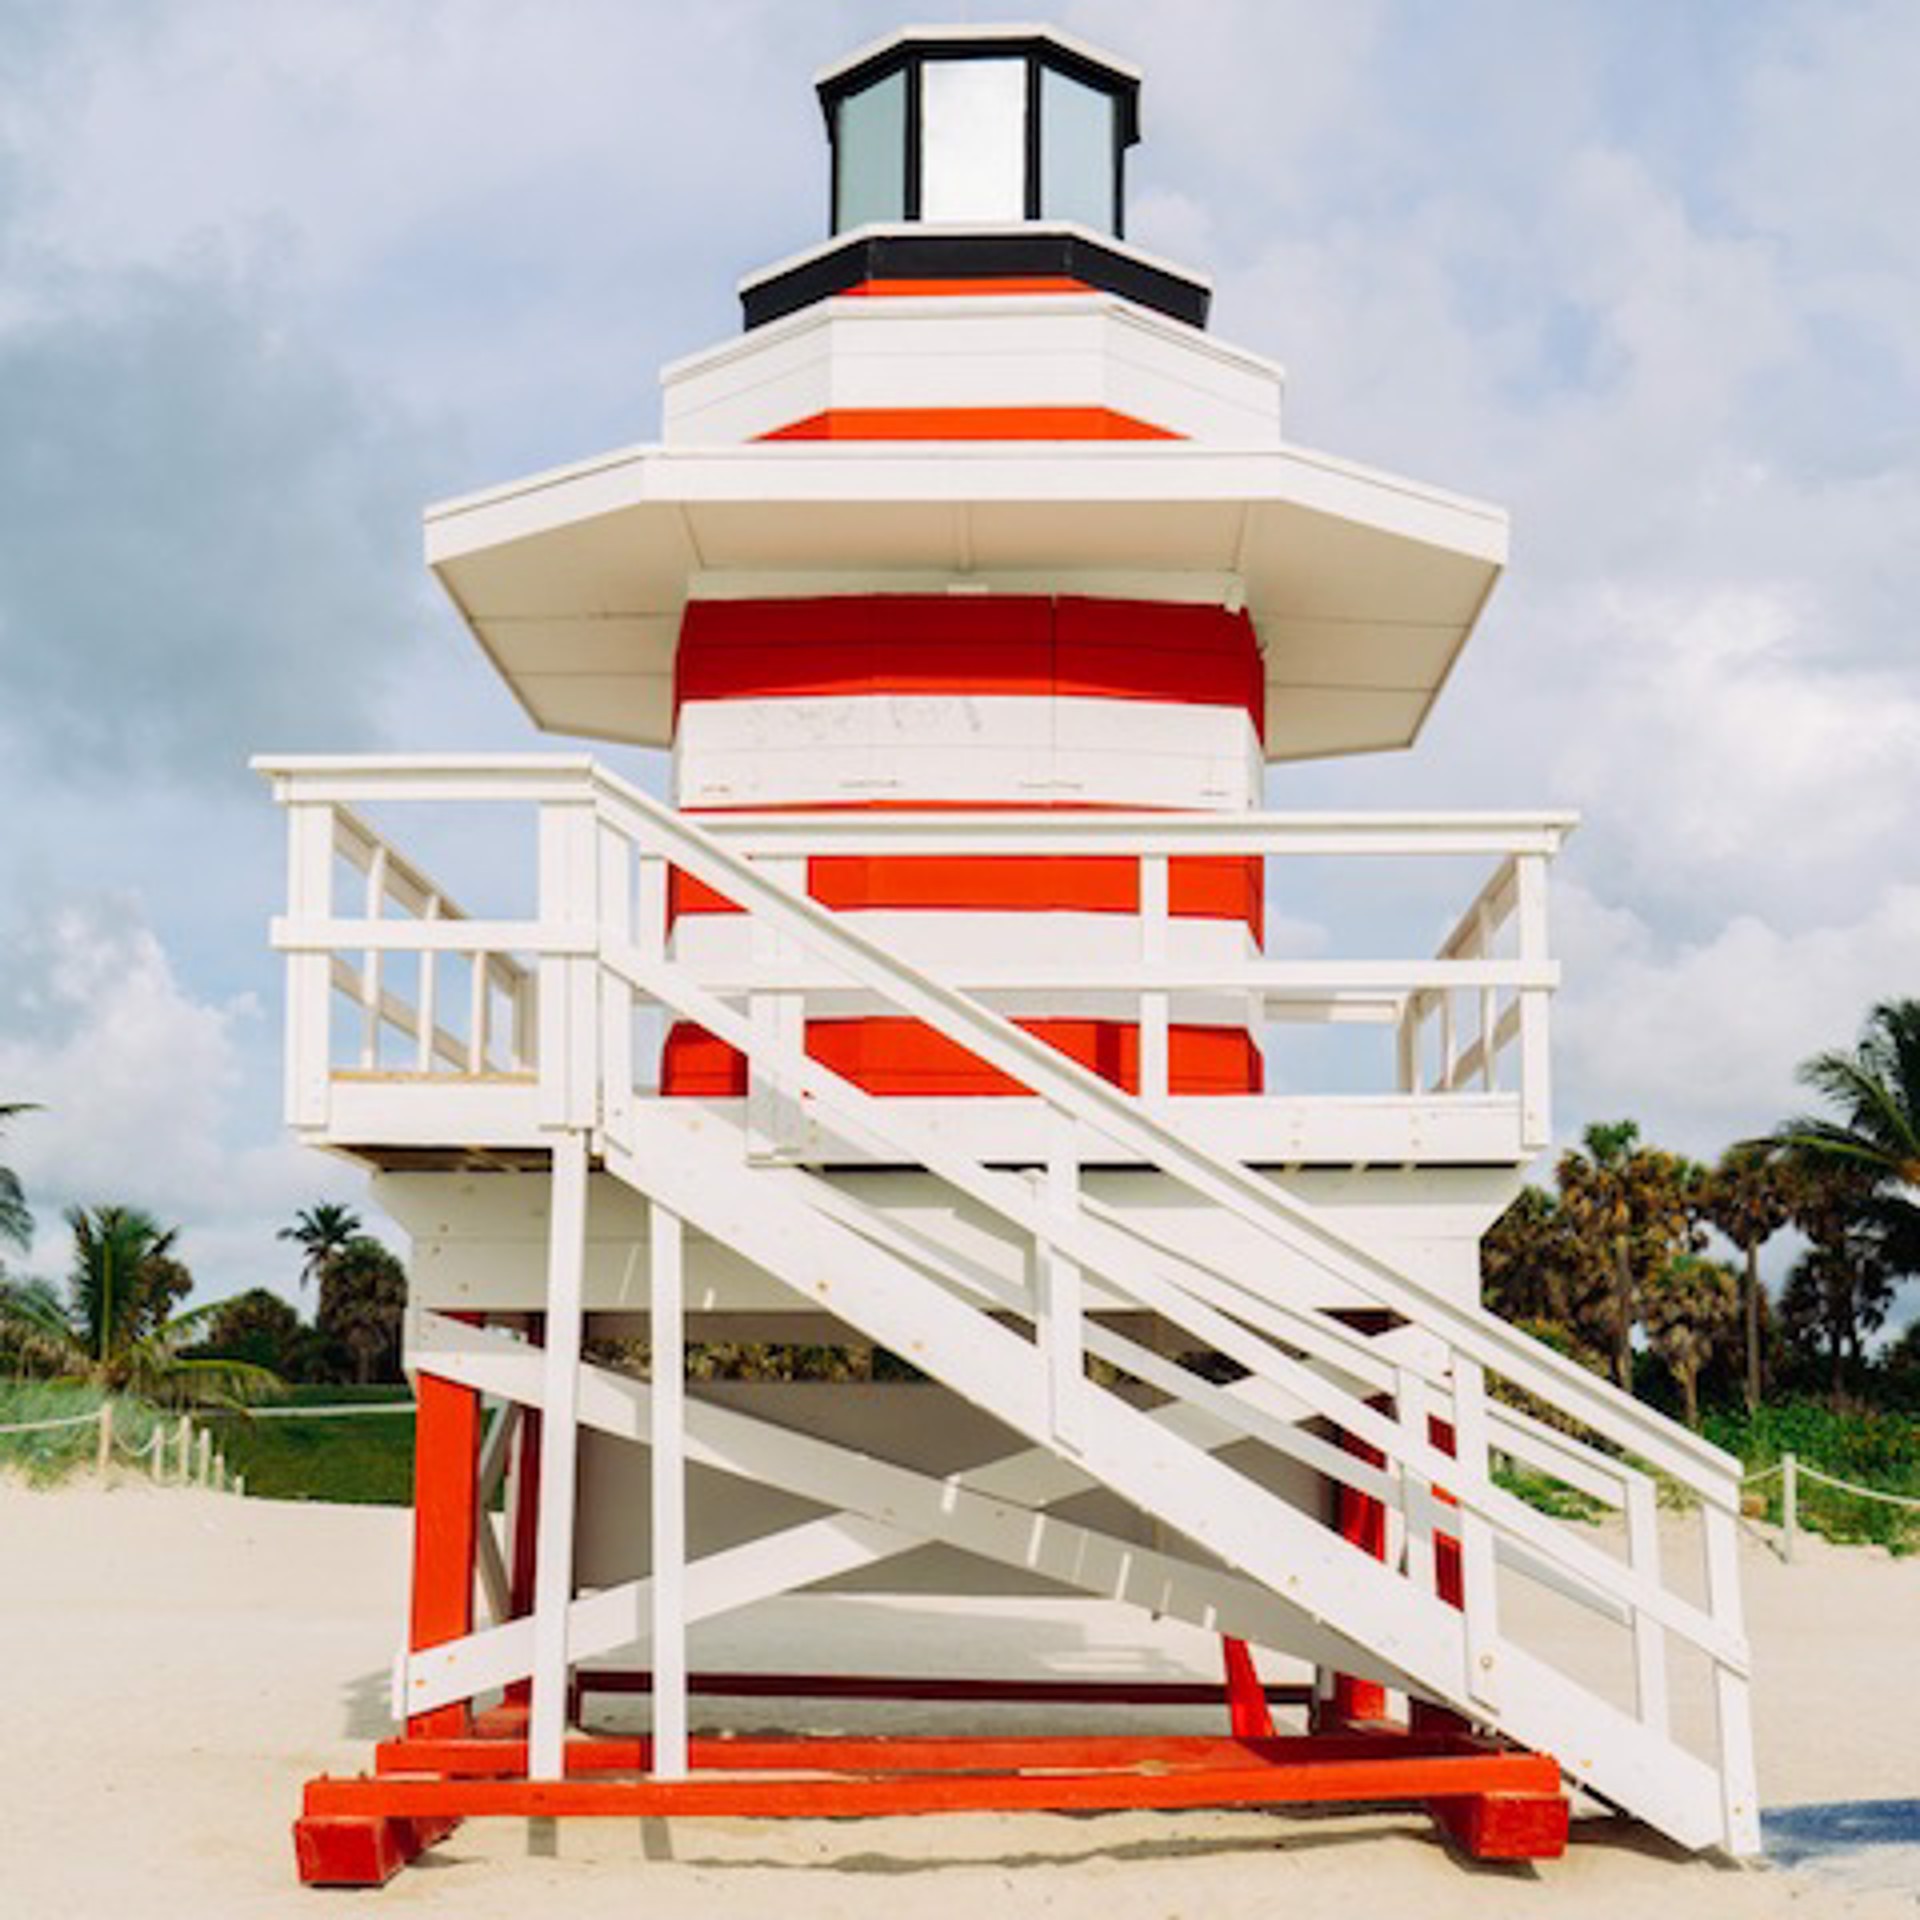 Lighthouse Lifeguard Stand by Peter Mendelson